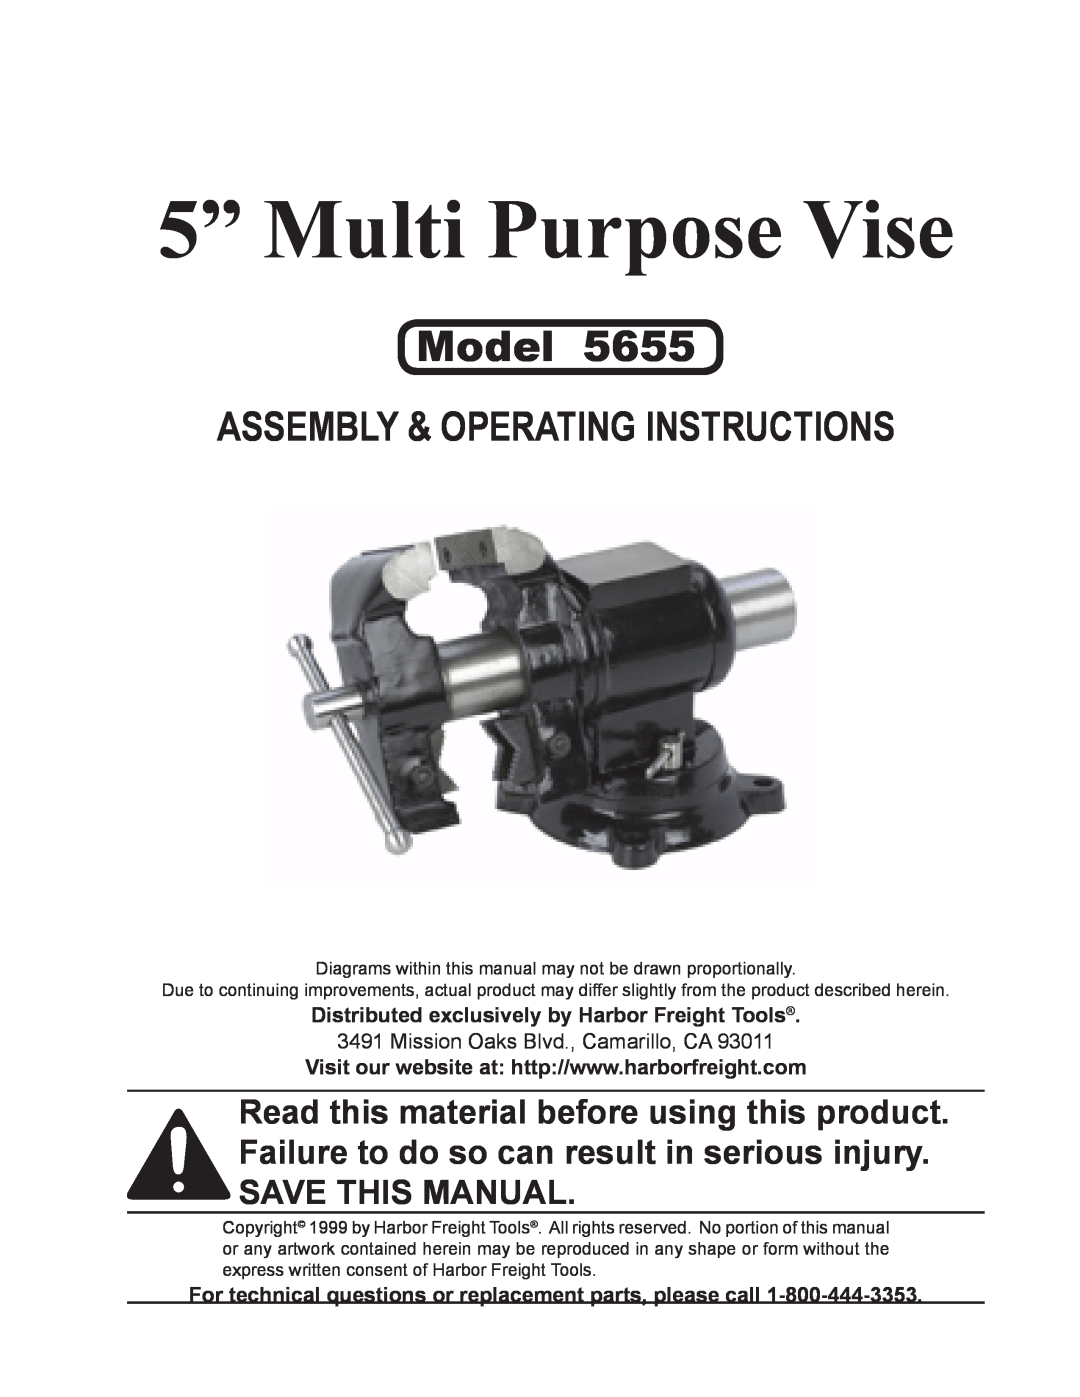 Harbor Freight Tools 5655 operating instructions 5” Multi Purpose Vise, Model, Assembly & Operating Instructions 